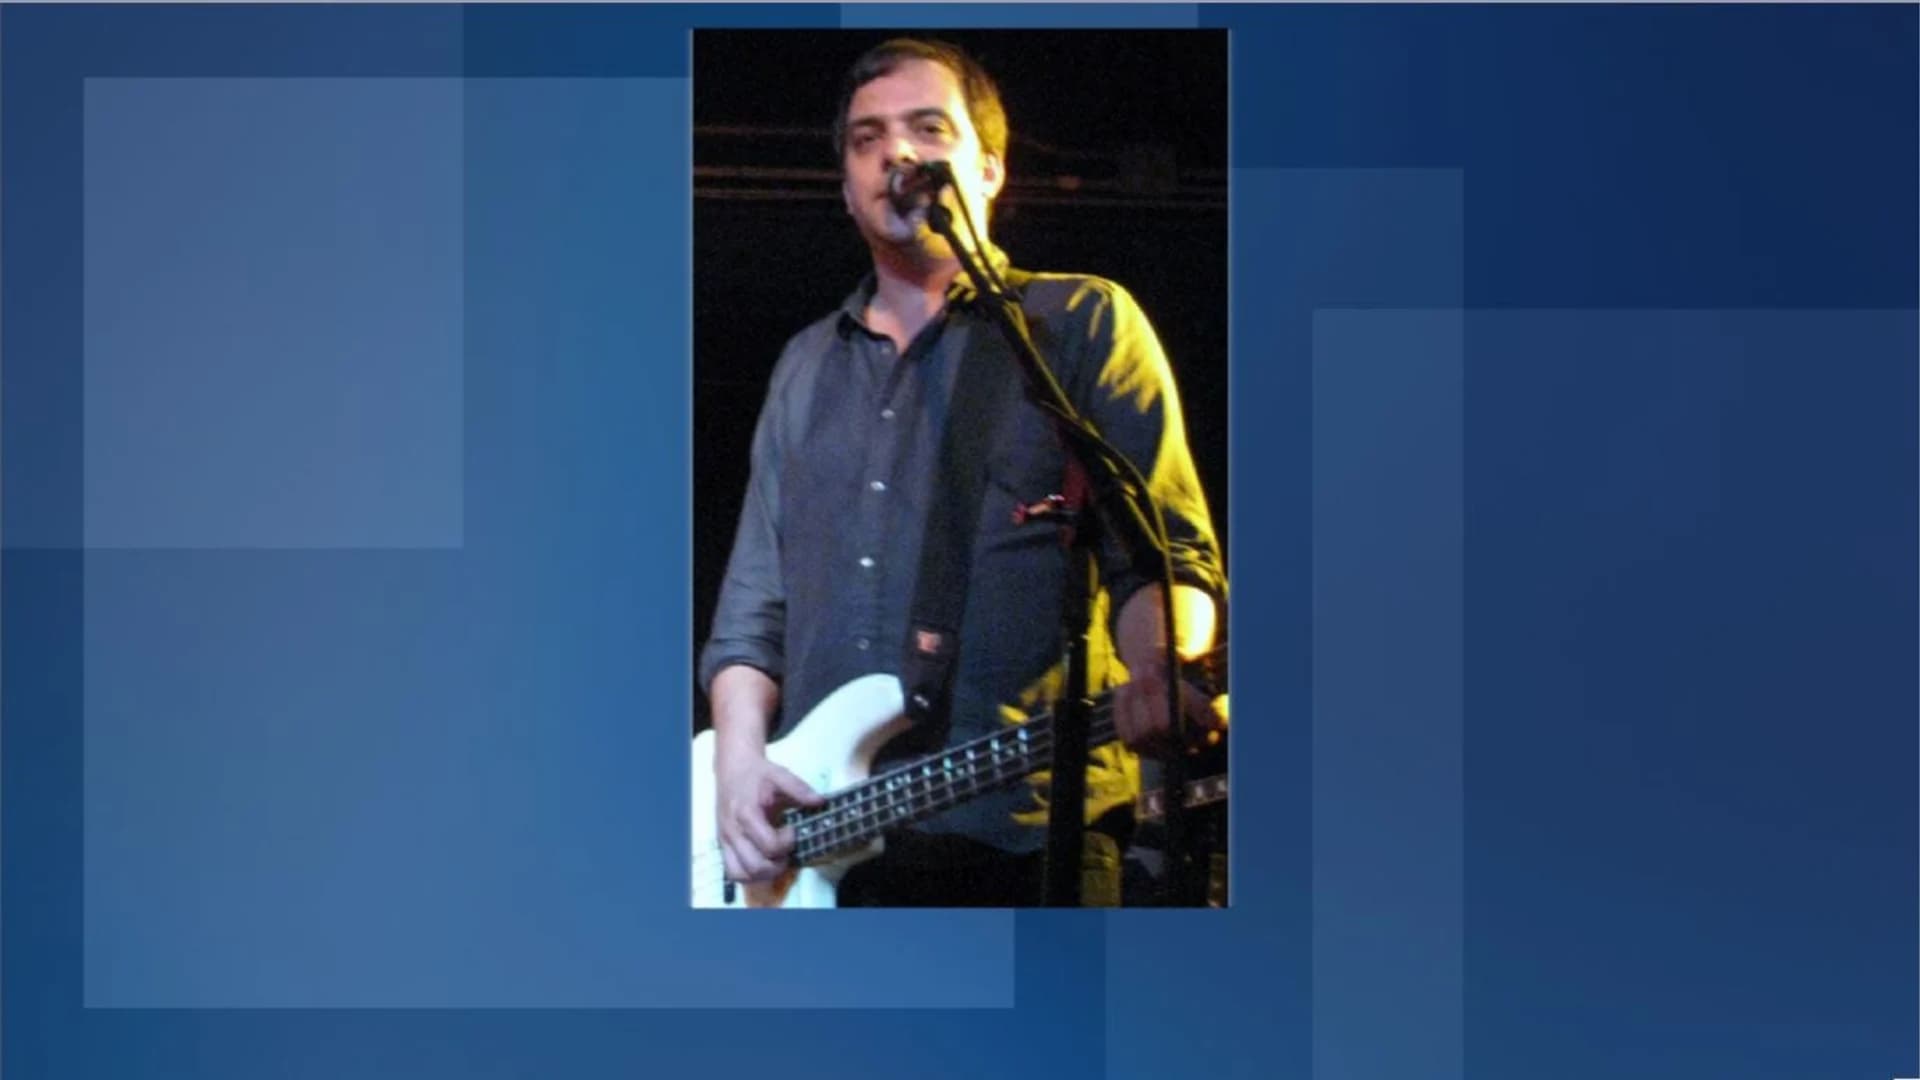 Report: Fountains of Wayne co-founder Adam Schlesinger succumbs to COVID-19